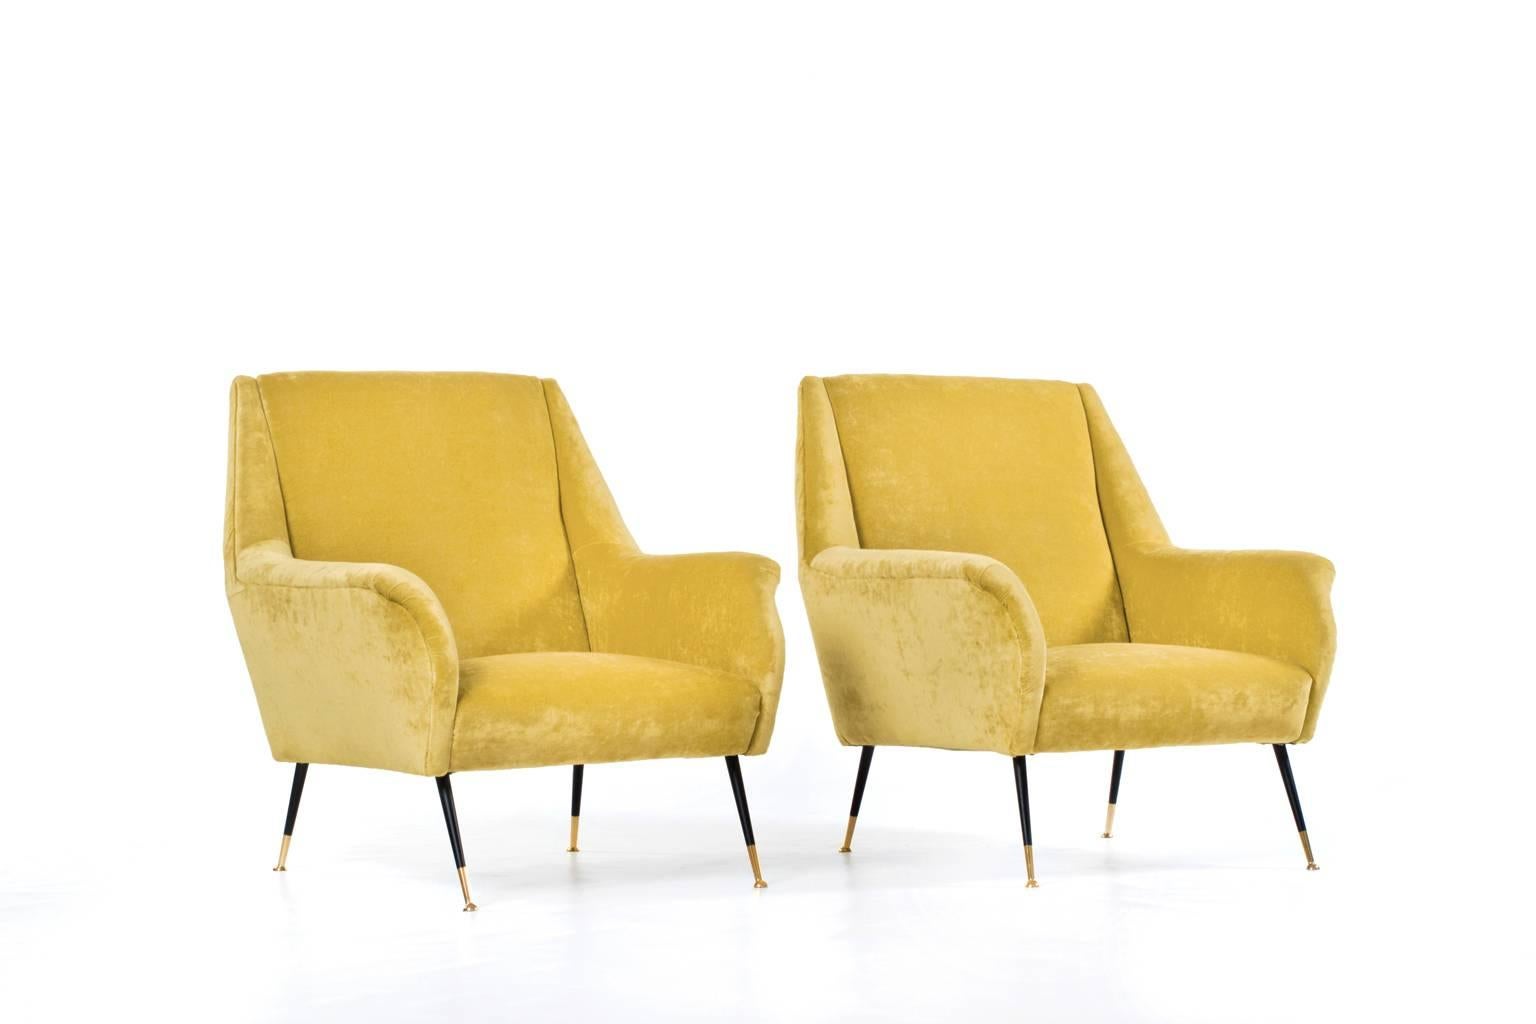 Beautiful pair of Italian lounge chairs in the style of Carlo di Carli, Italy, 1950s. Very elegant form and chic brass legs. Upholstered in warm yellow velours, providing a very comfortable and soft feeling. In excellent condition.

Price for the